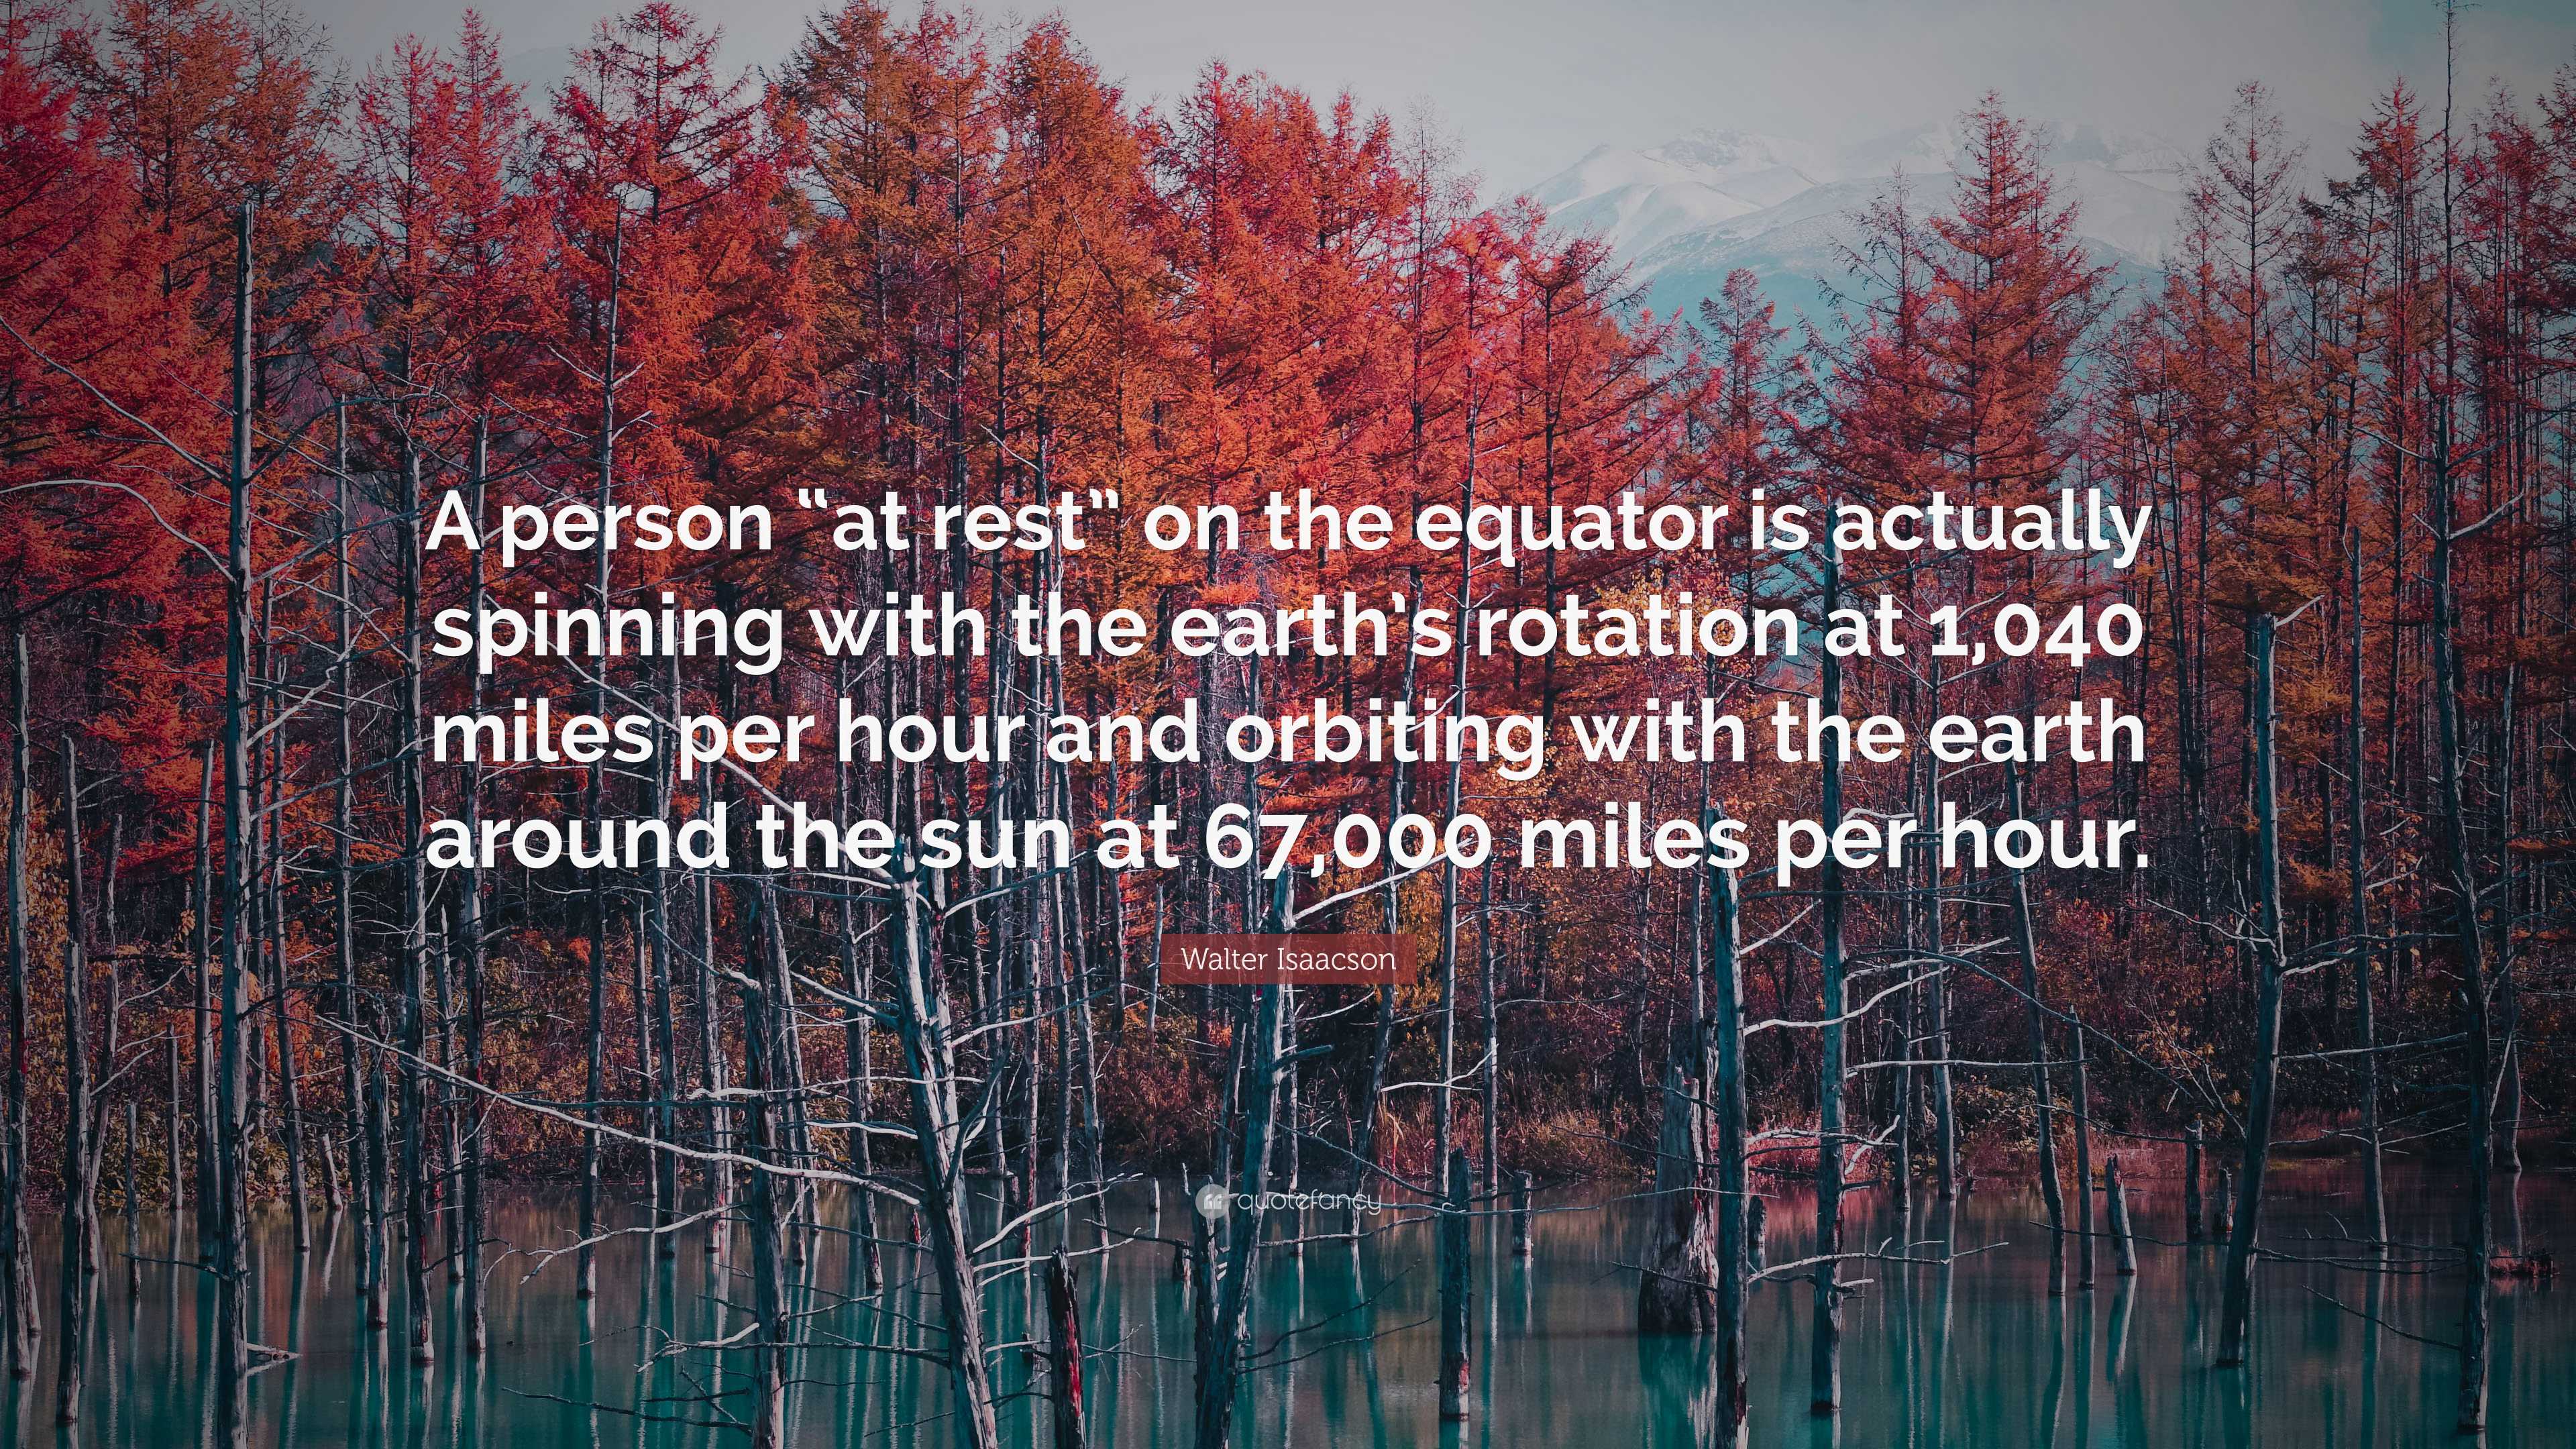 Walter Isaacson Quote: “A person “at rest” on the equator is actually  spinning with the earth's rotation at 1,040 miles per hour and orbiting  wi”